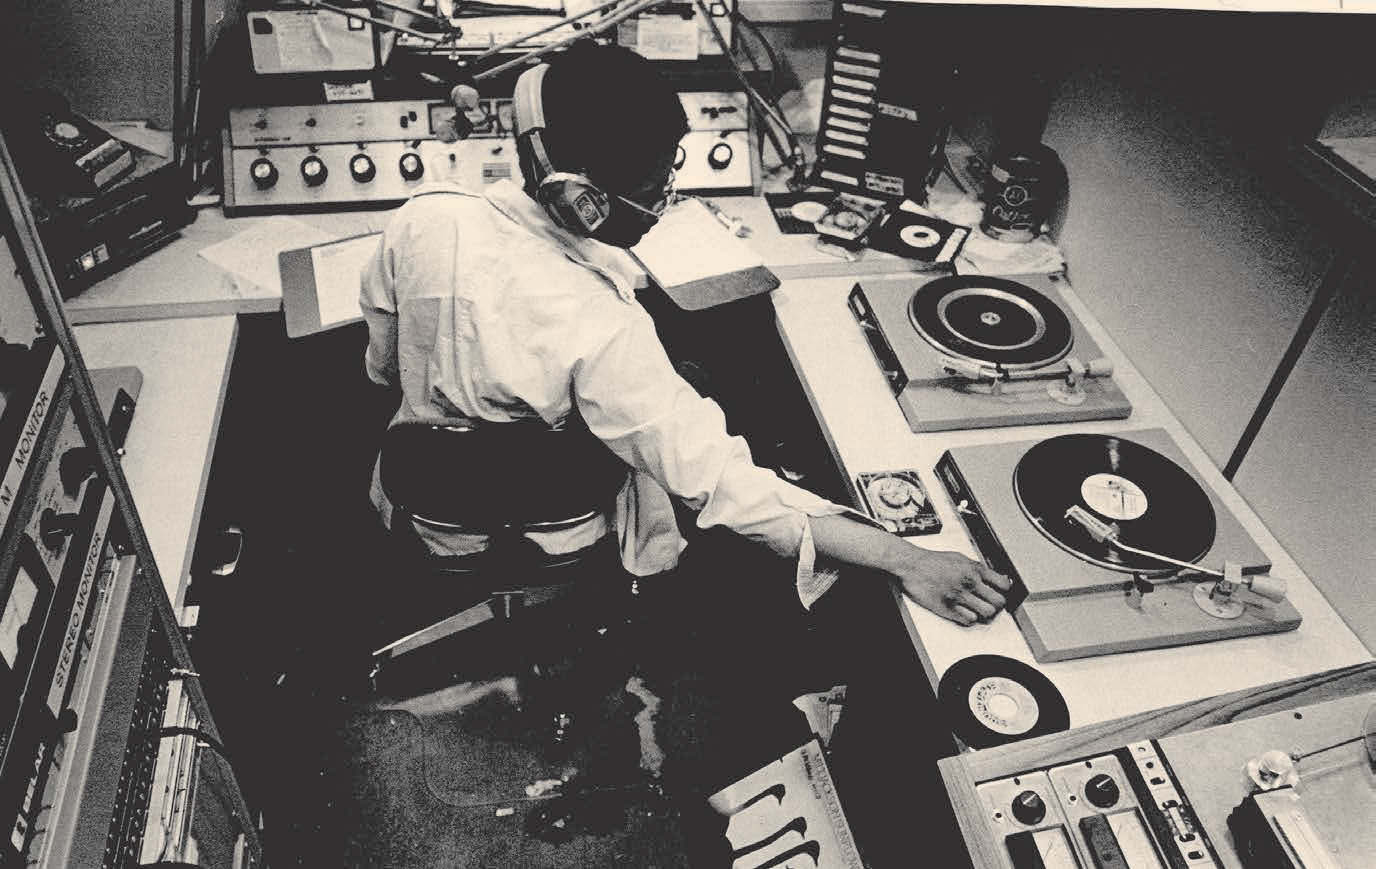 A student in the WAER studio in the 1970s